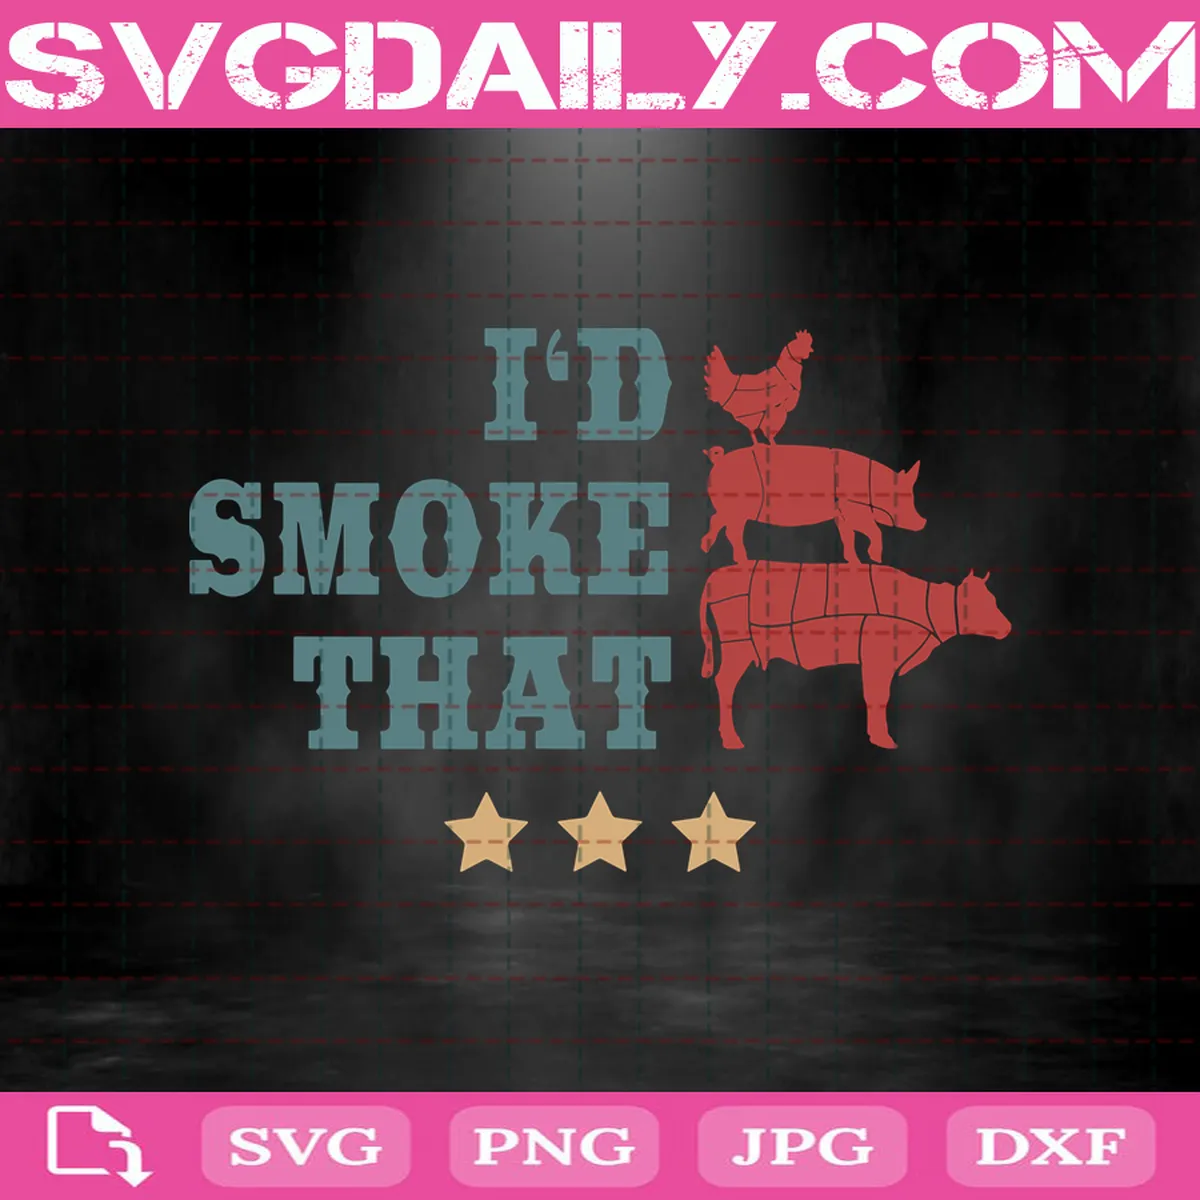 I'd Smoke That Stacked Farm Beef Cow Chicken Pork Pig Grill BBQ Barbeque Smoke Smoker Svg, I'd Smoke That Svg, BBQ Smoker Father Barbecue Grilling Svg